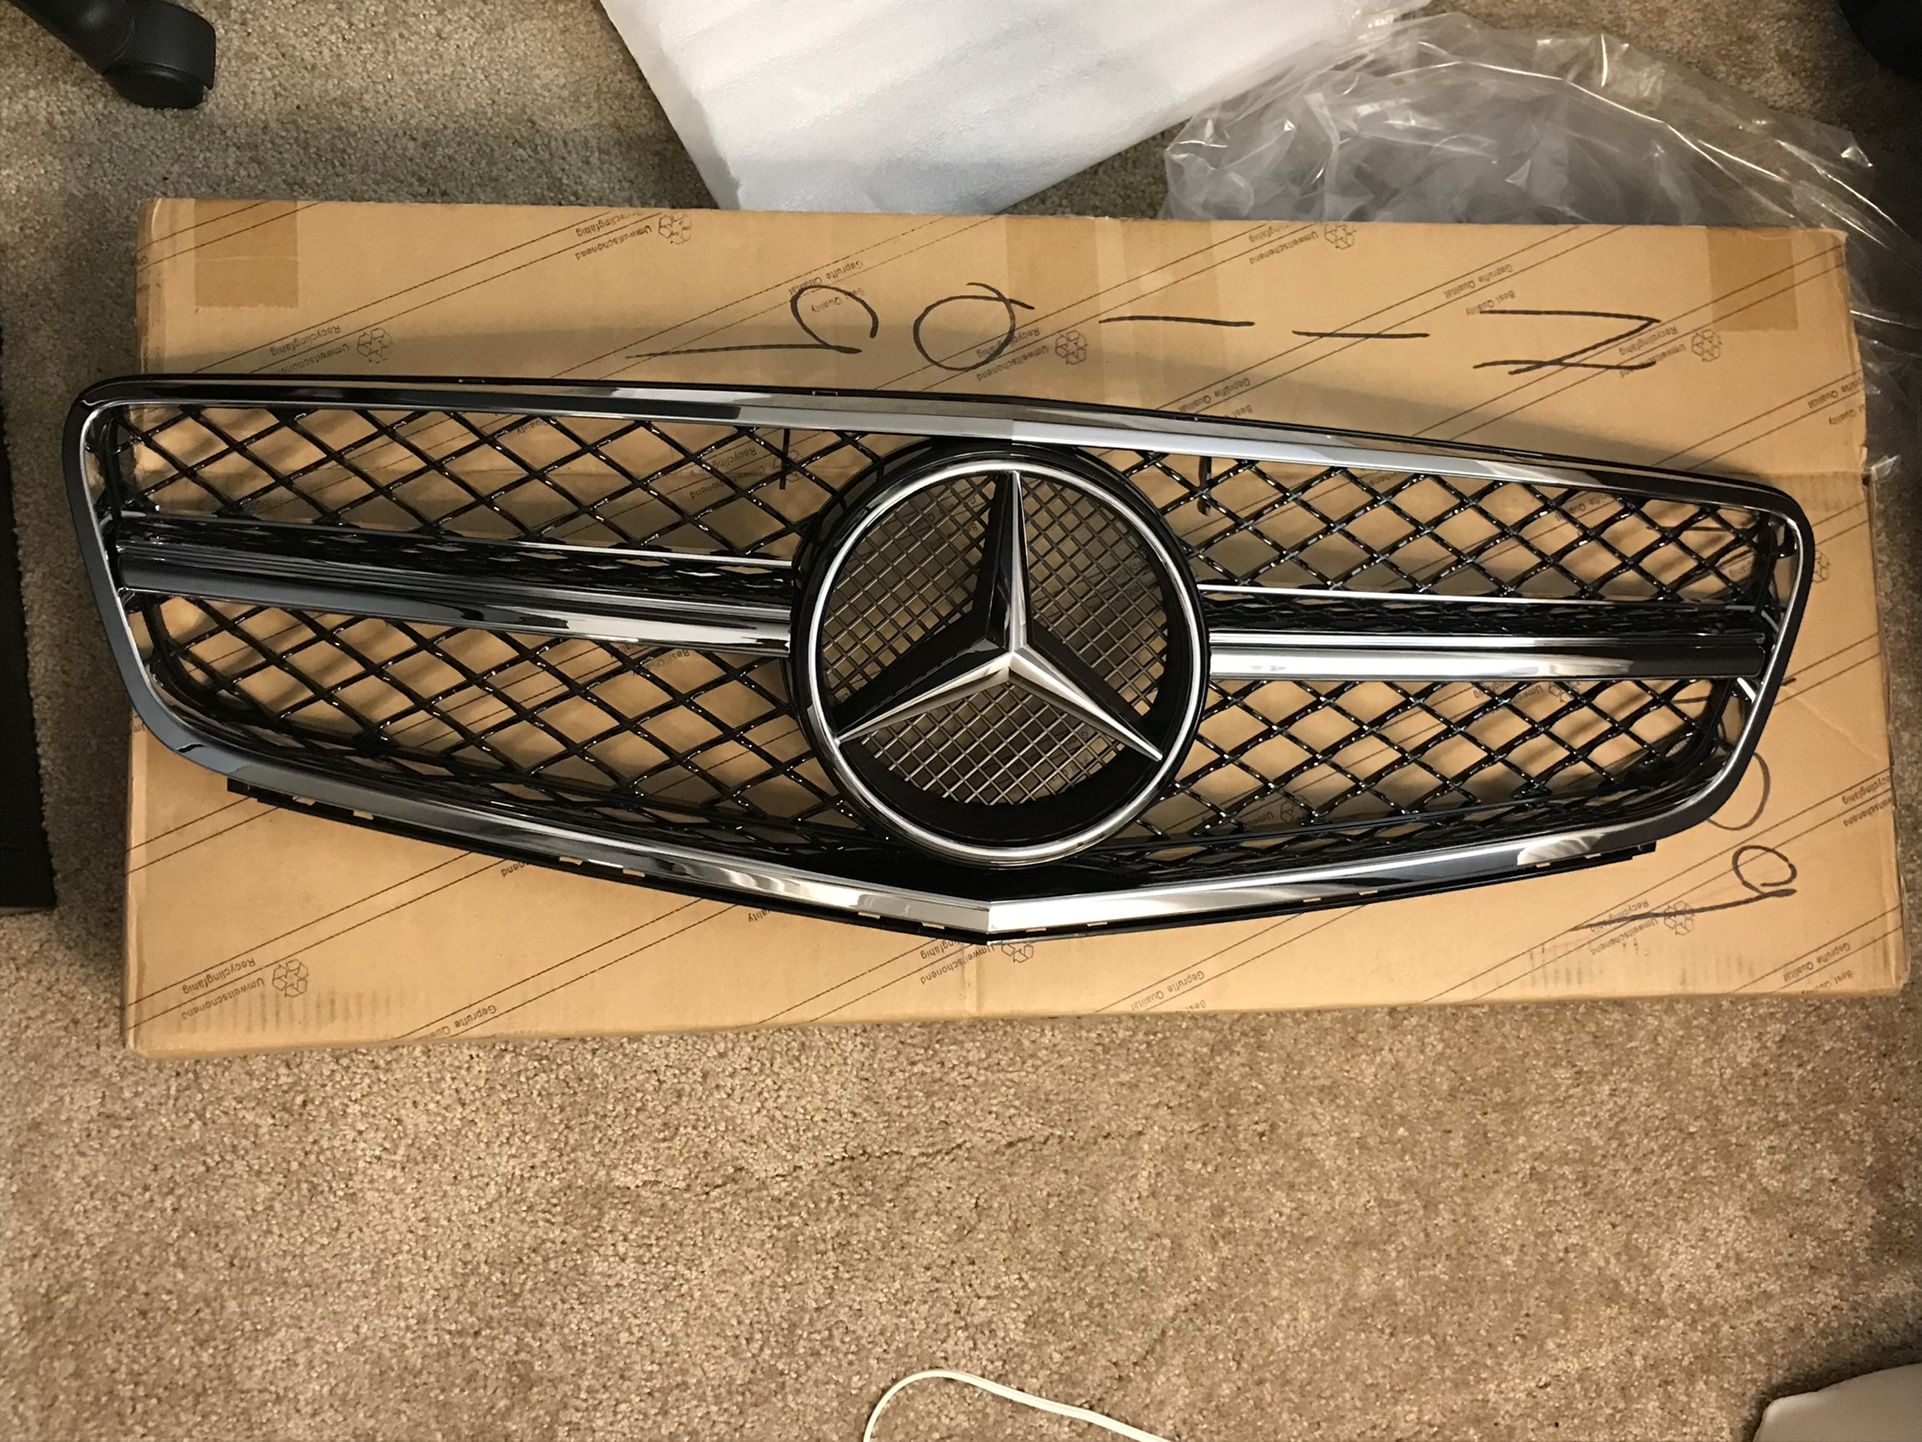 *new* Mercedes C63 Grill Fits/for (W204) C-Class models